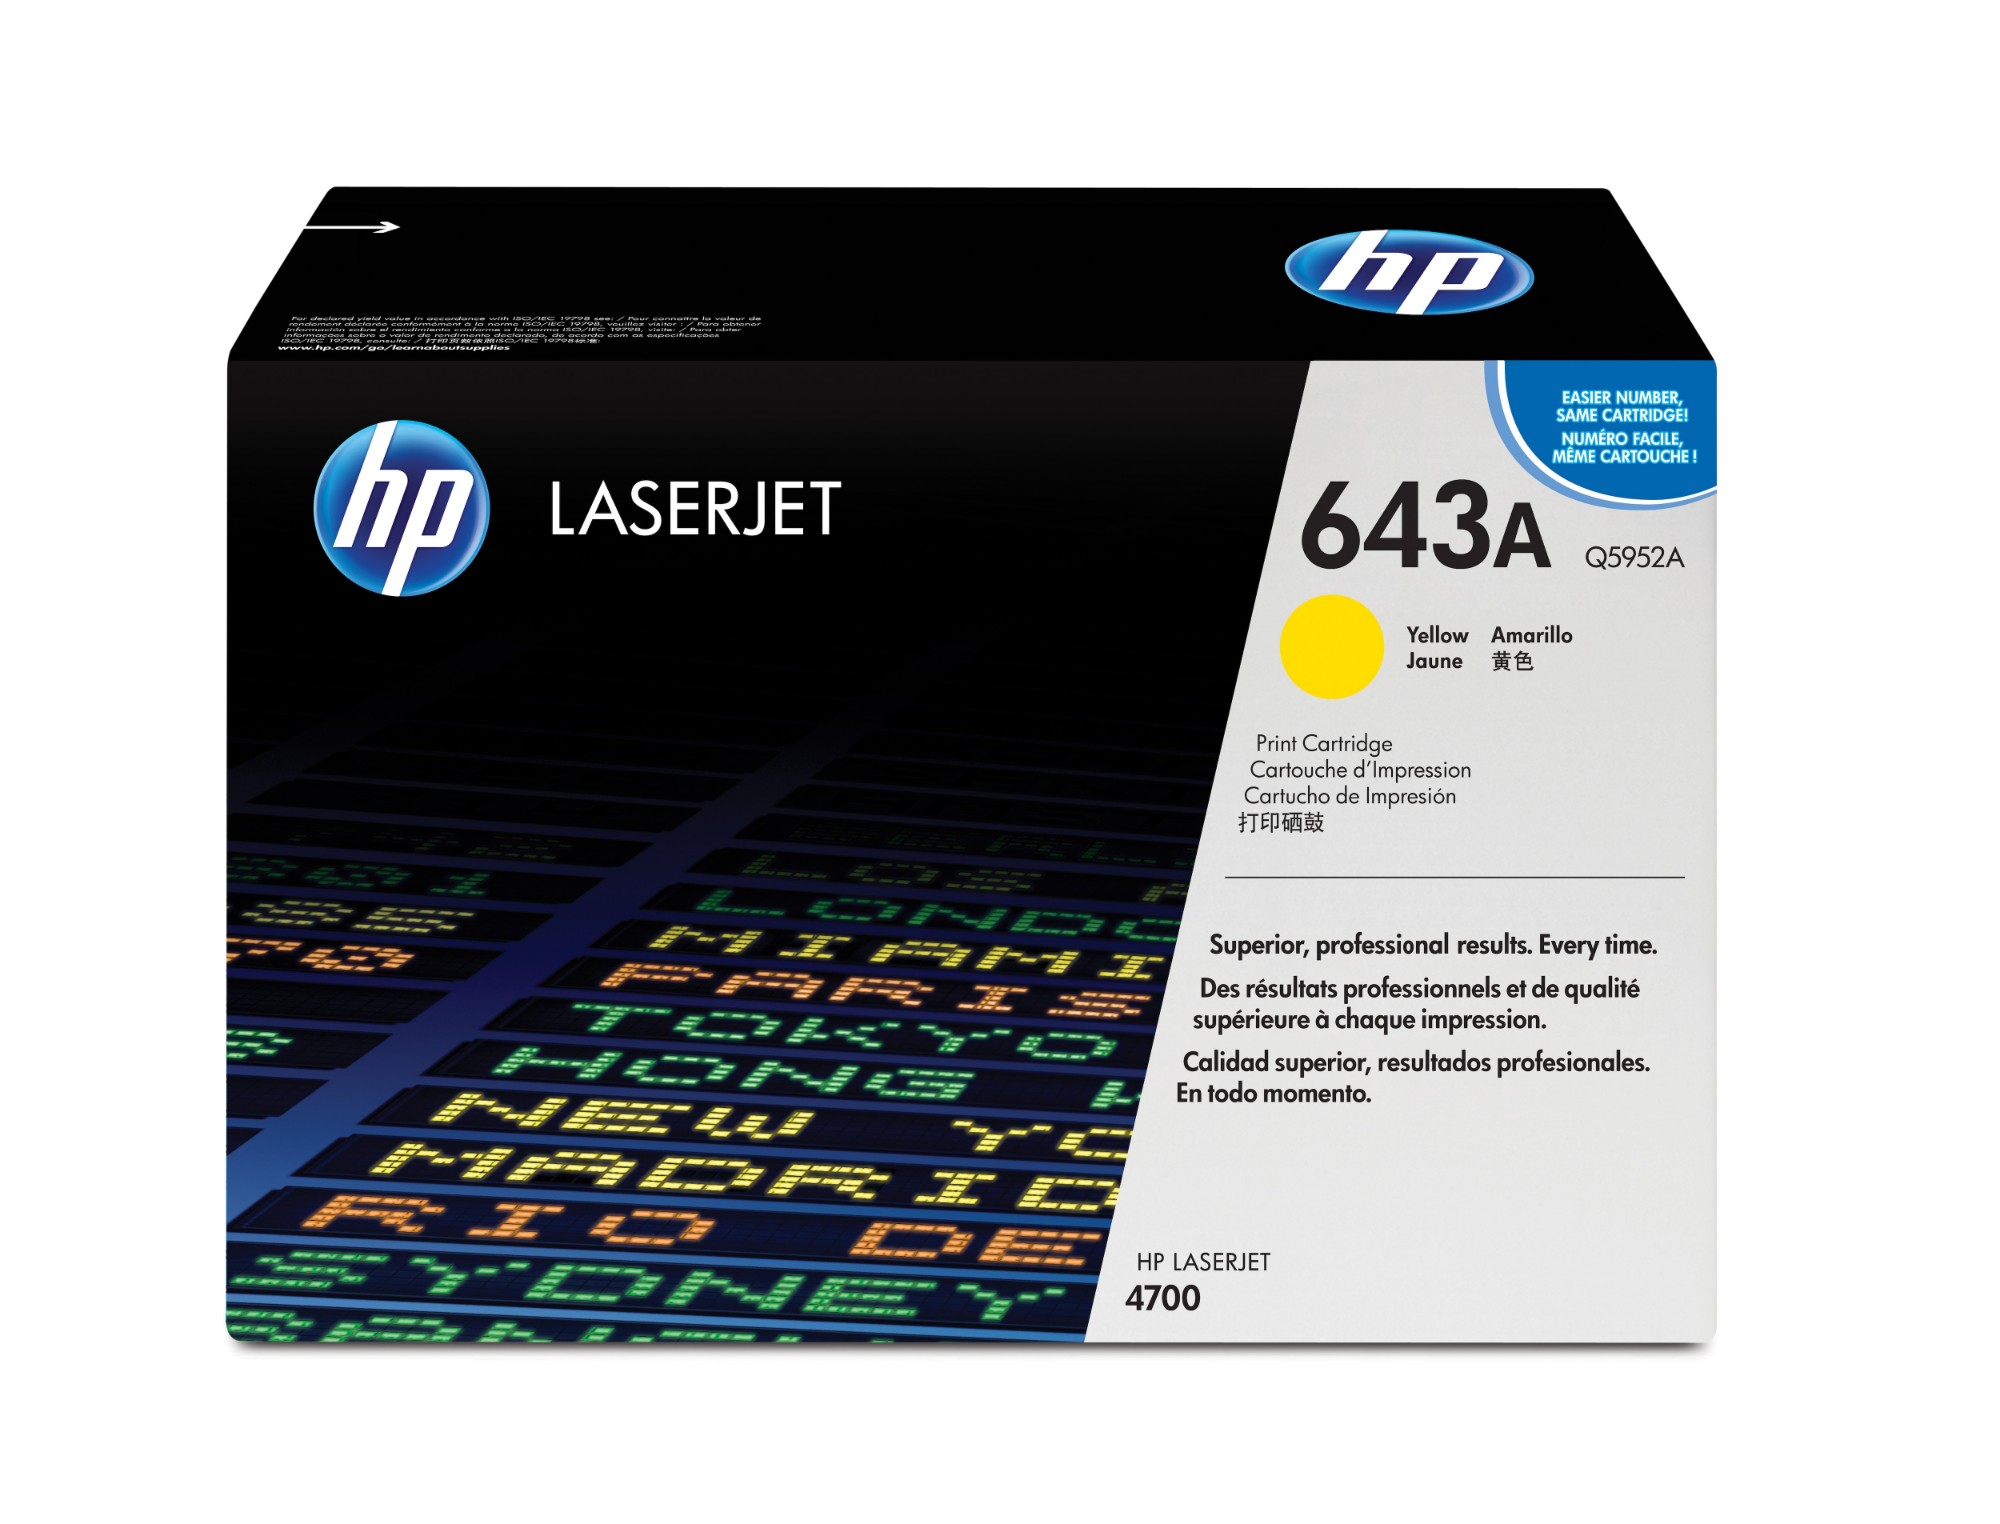 HP Q5952A/643A Toner cartridge yellow, 10K pages/5% for HP Color LaserJet 4700